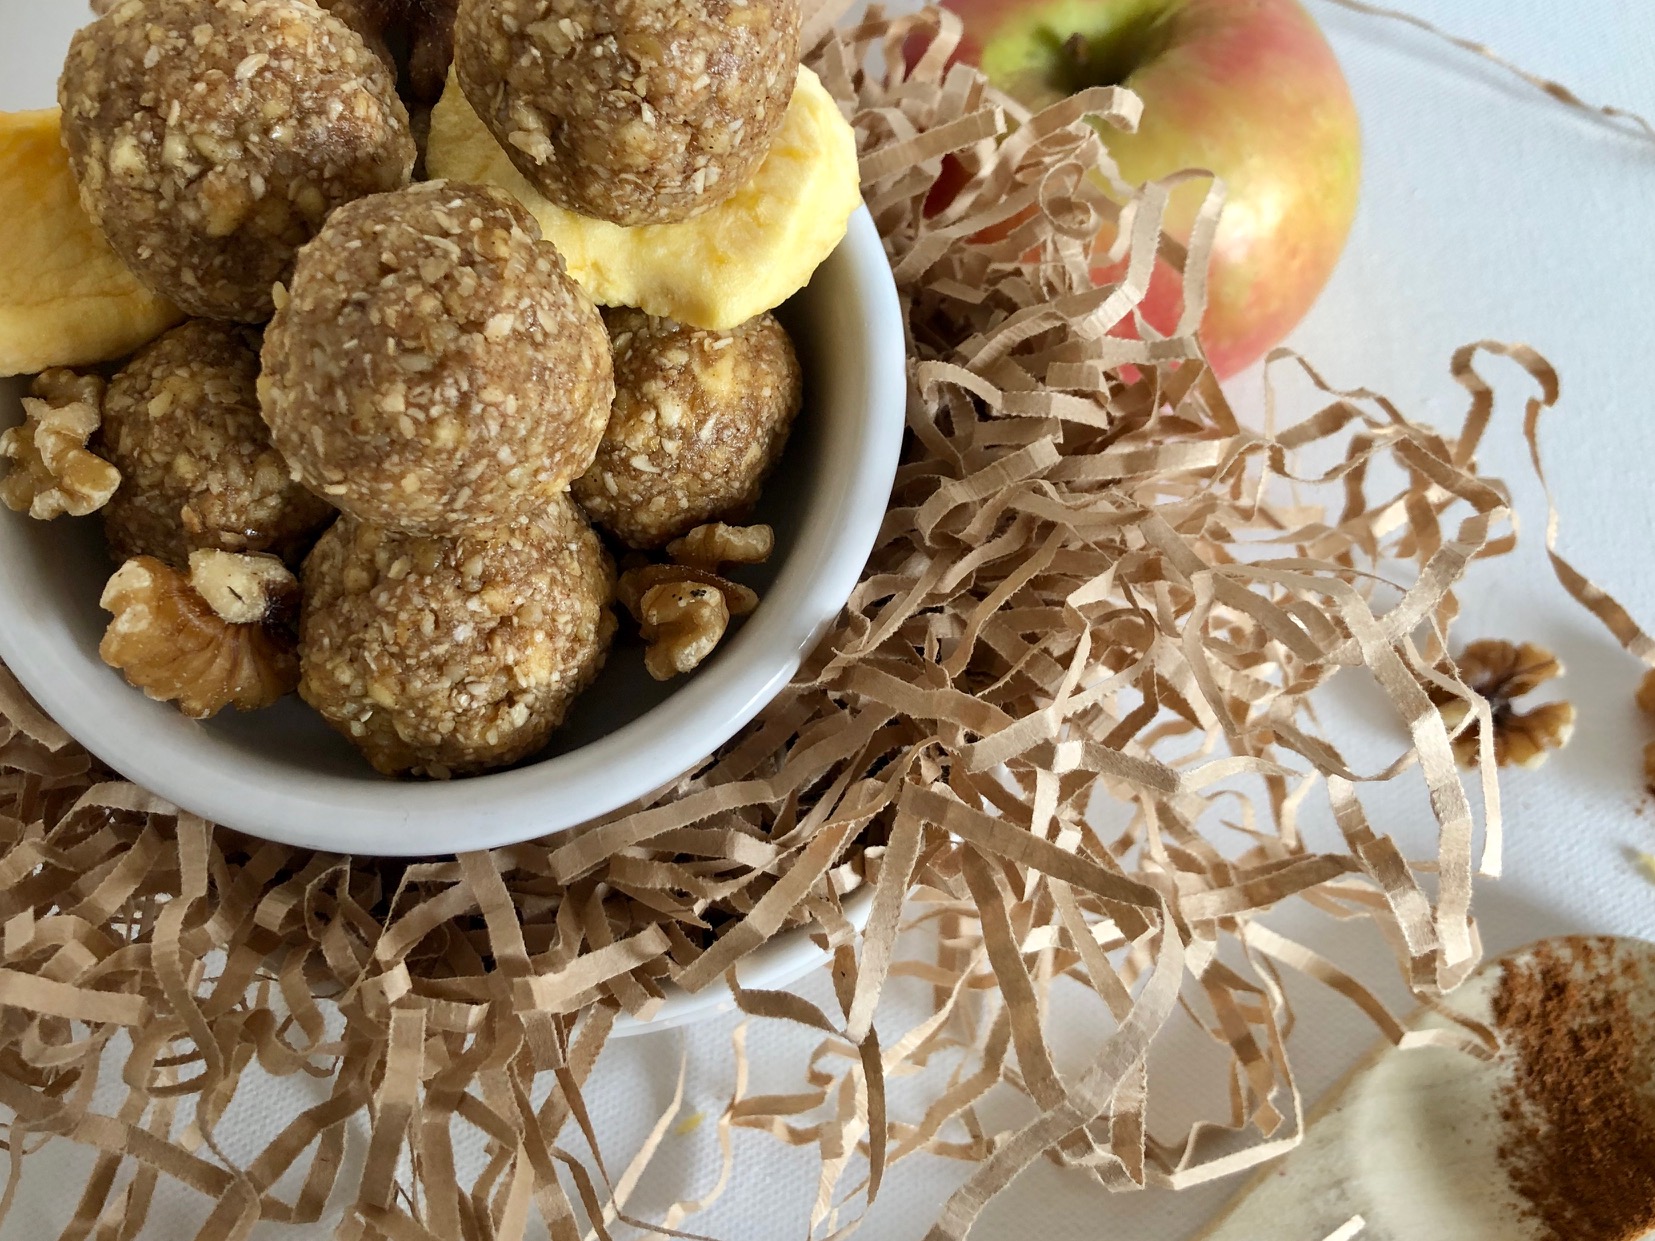 These Apple Pie Bliss Balls have all of the flavour without the cook time! They're absolutely delicious and perfect for on the go.